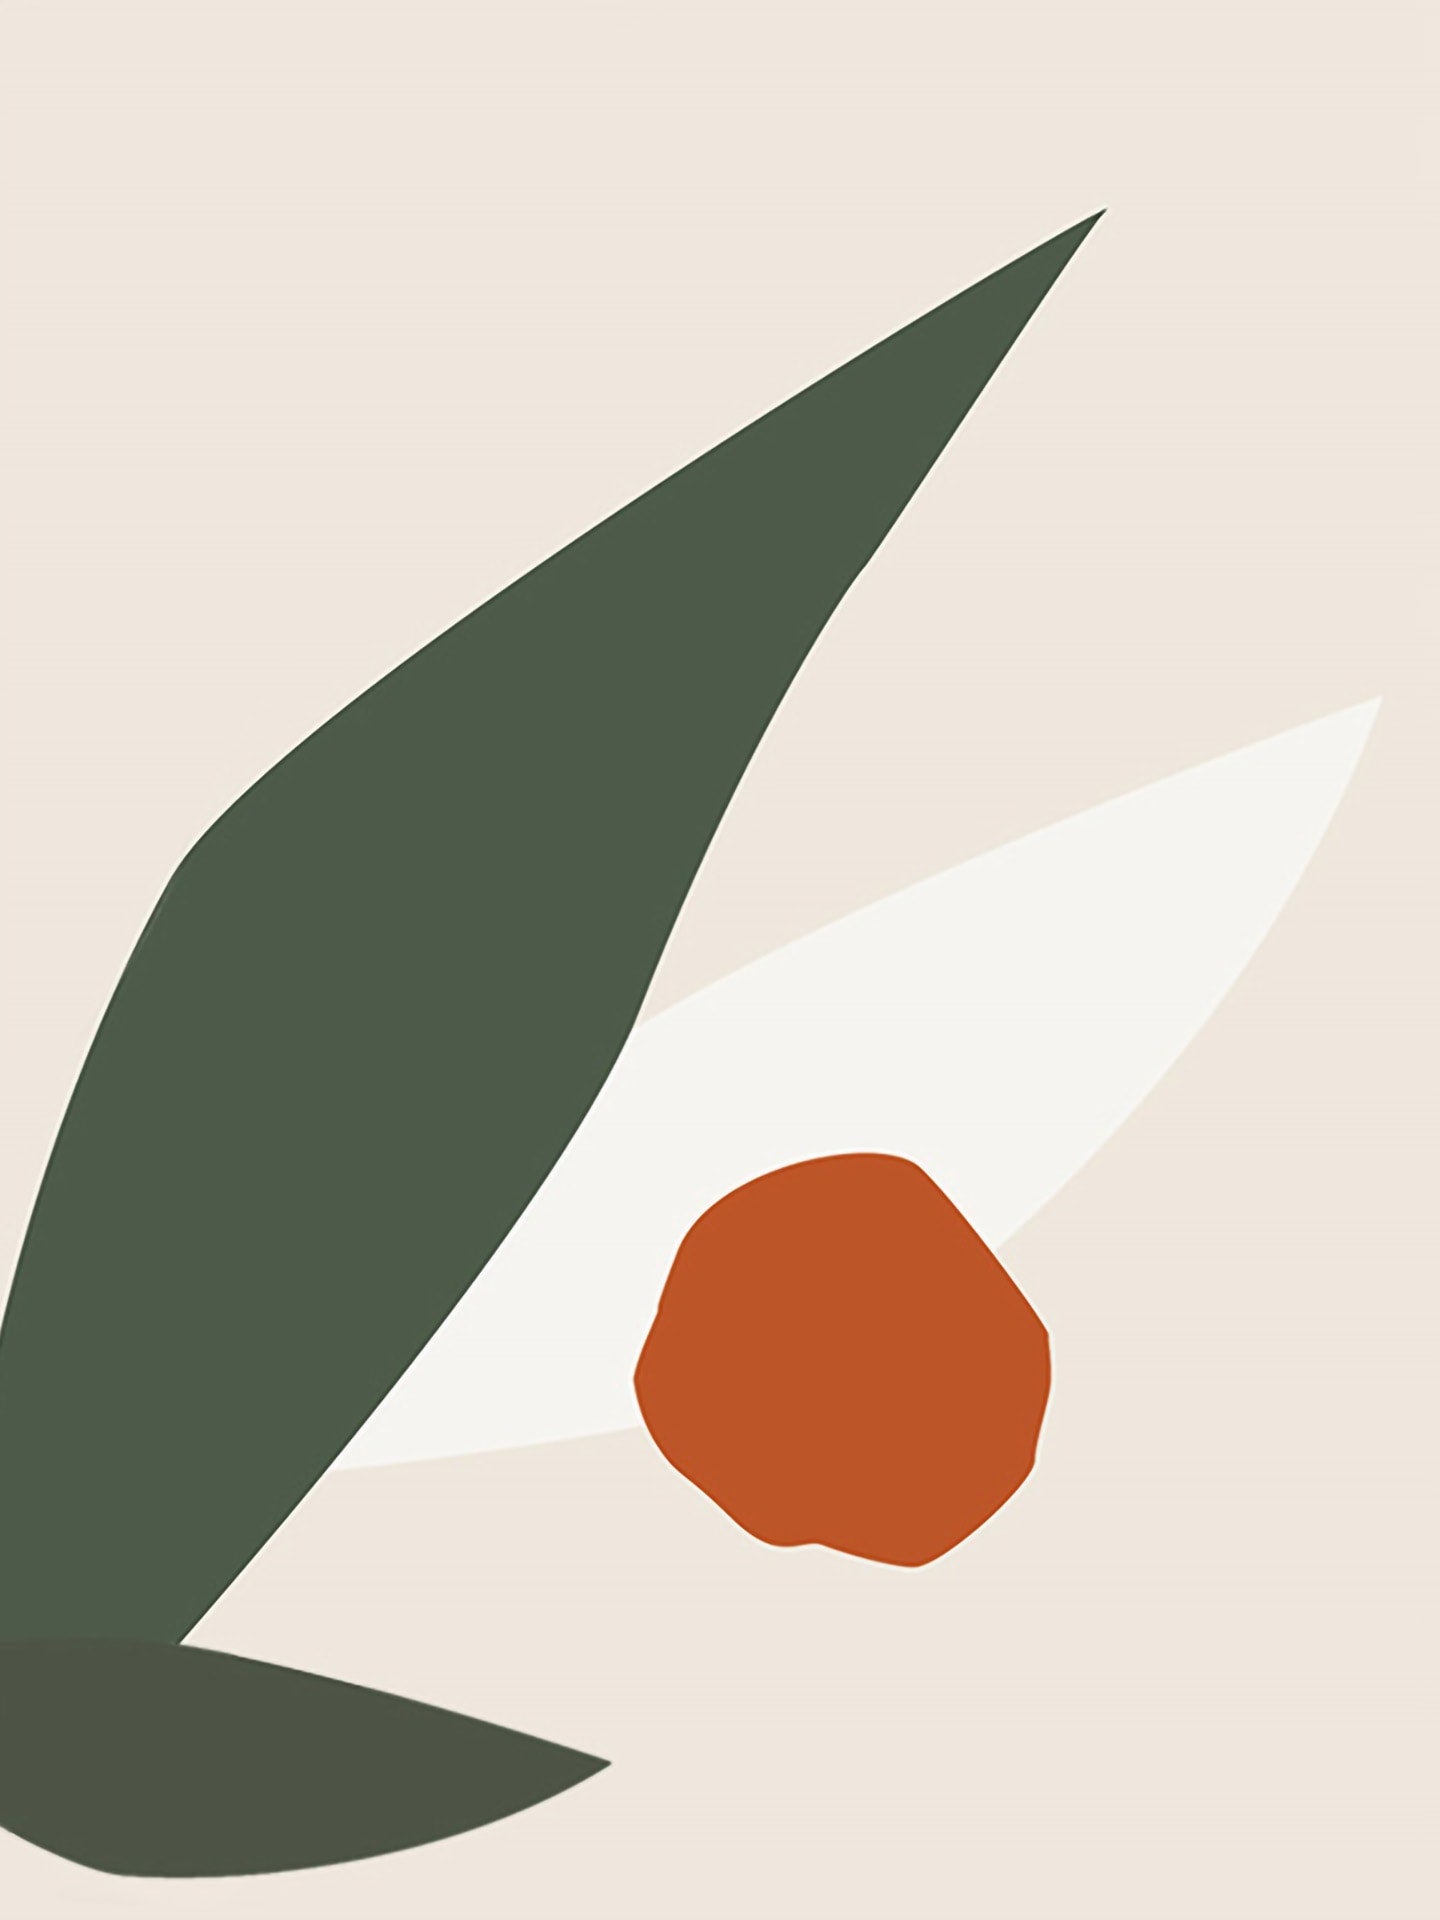 An illustration of a leaf with an orange ball.